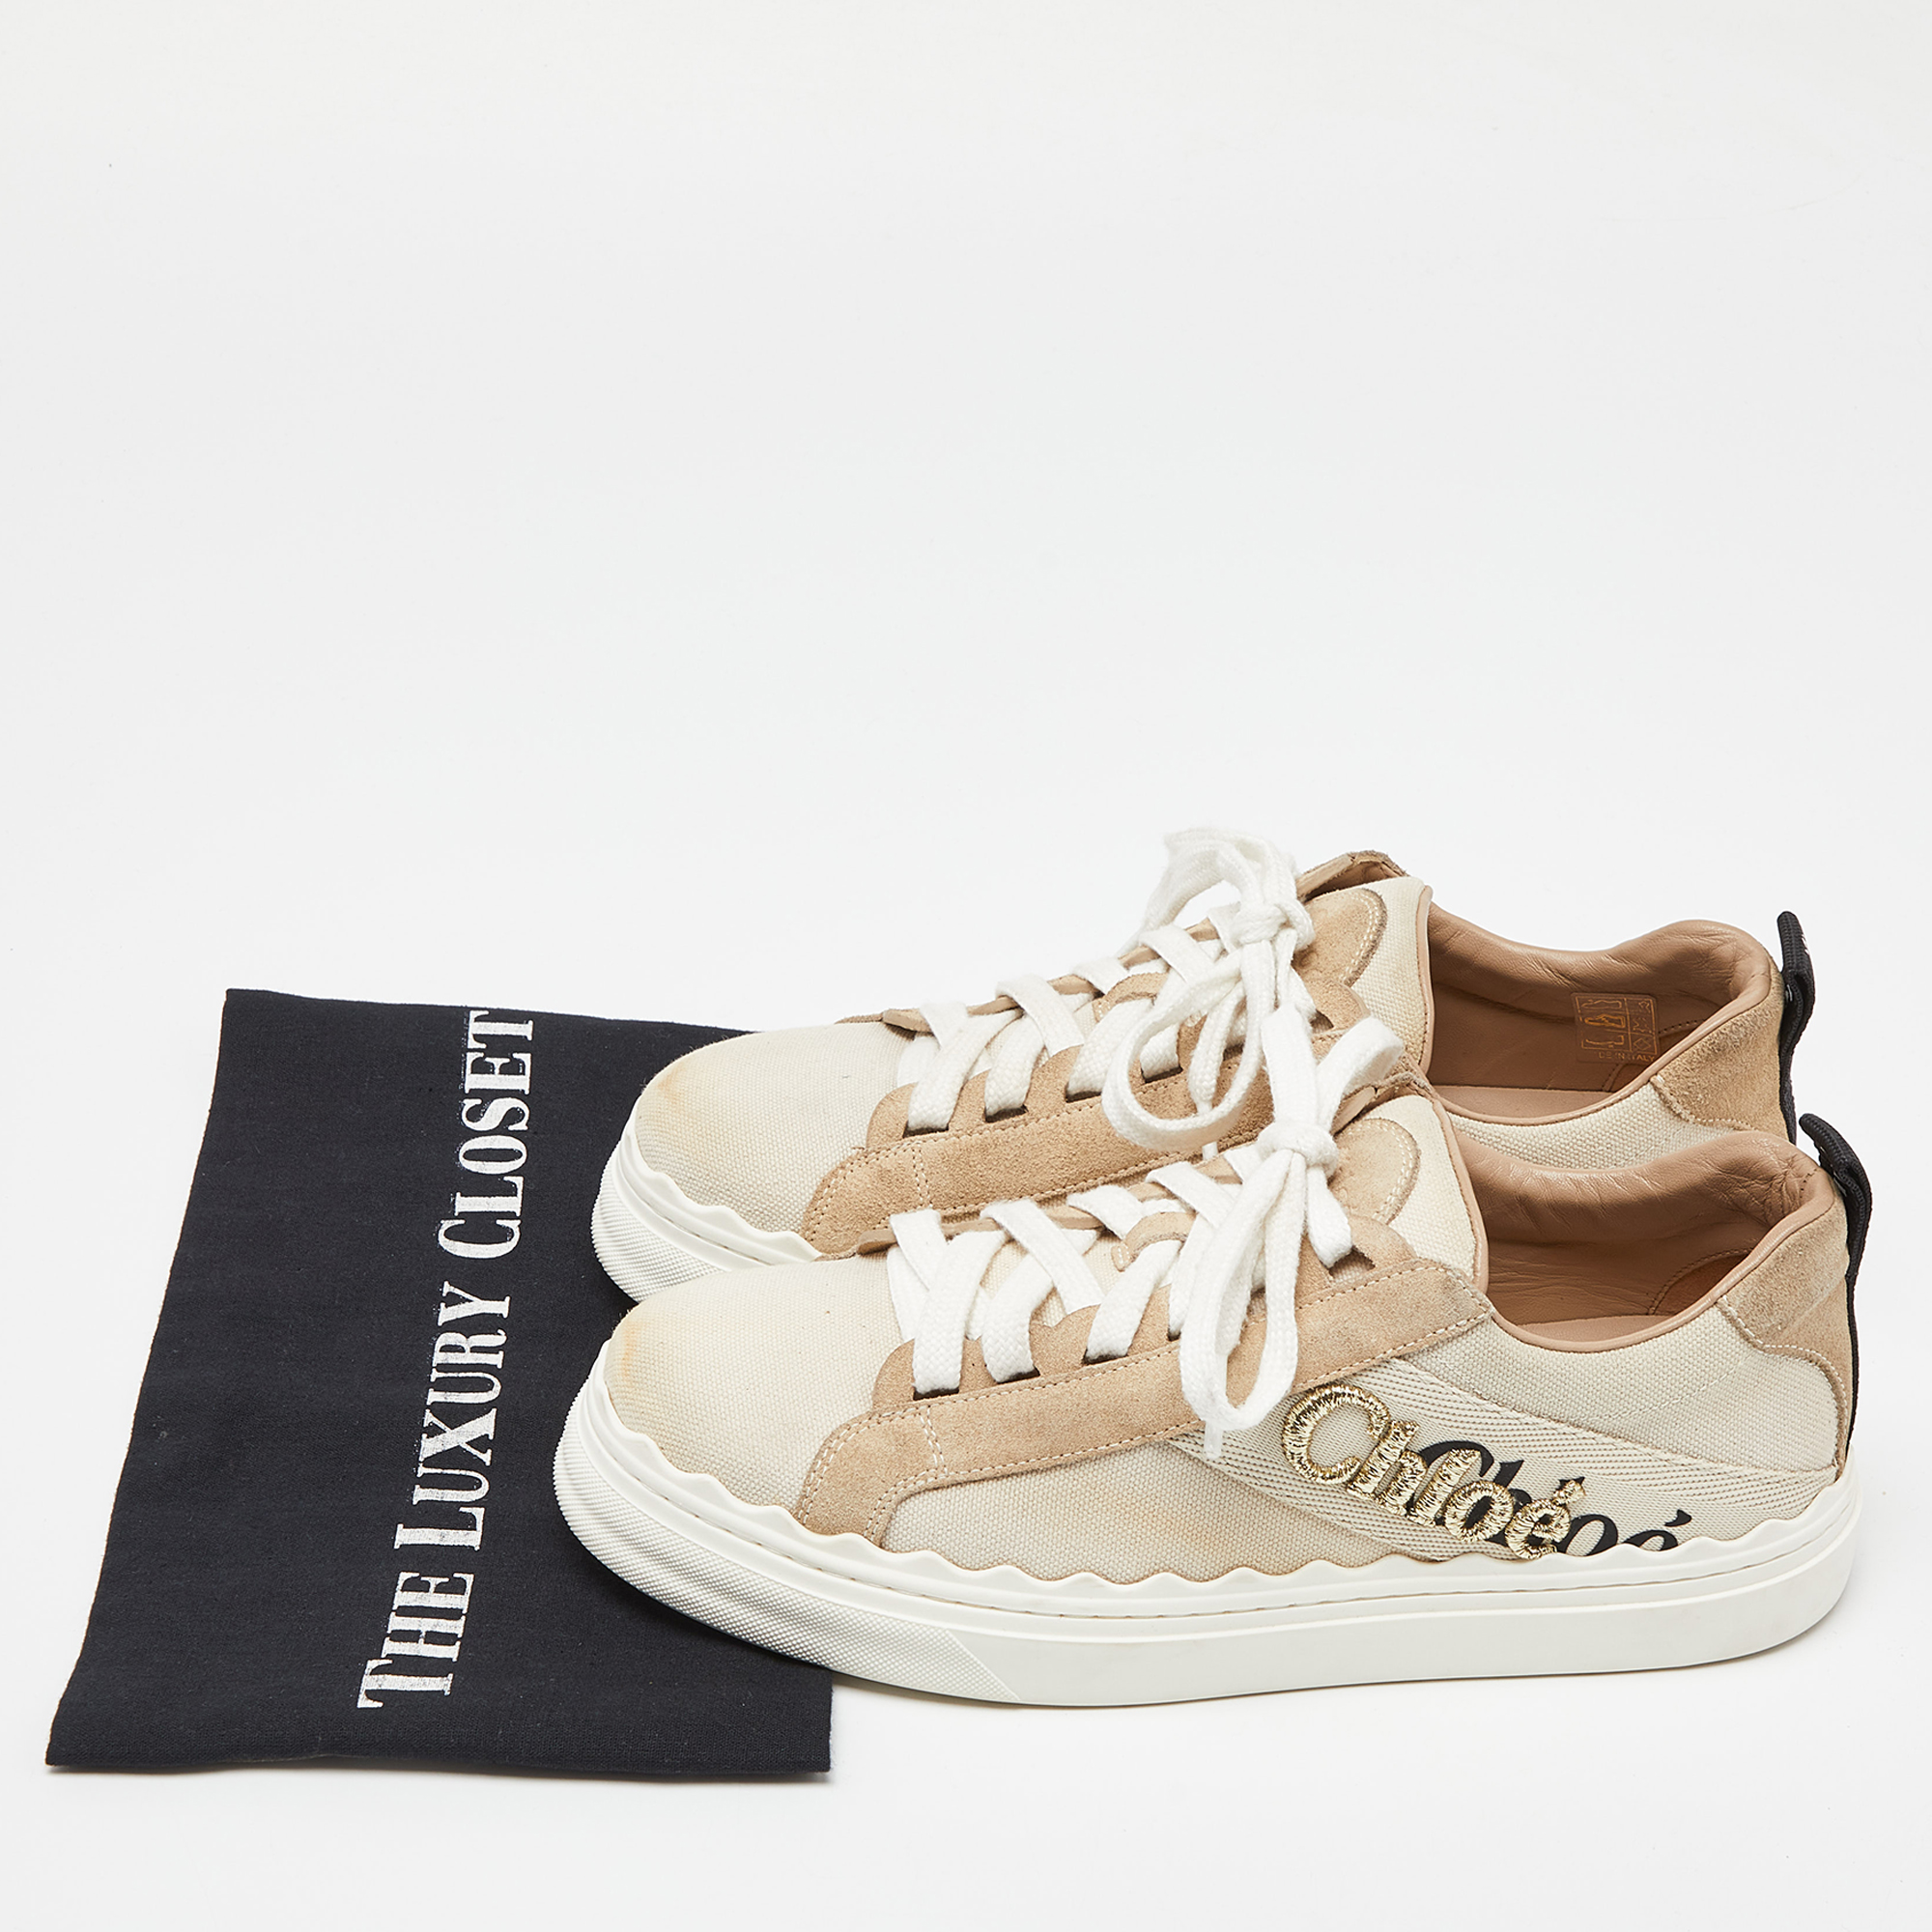 Chloé Beige Canvas And Suede Lauren Logo Embroidered Low Top Sneakers Size 39